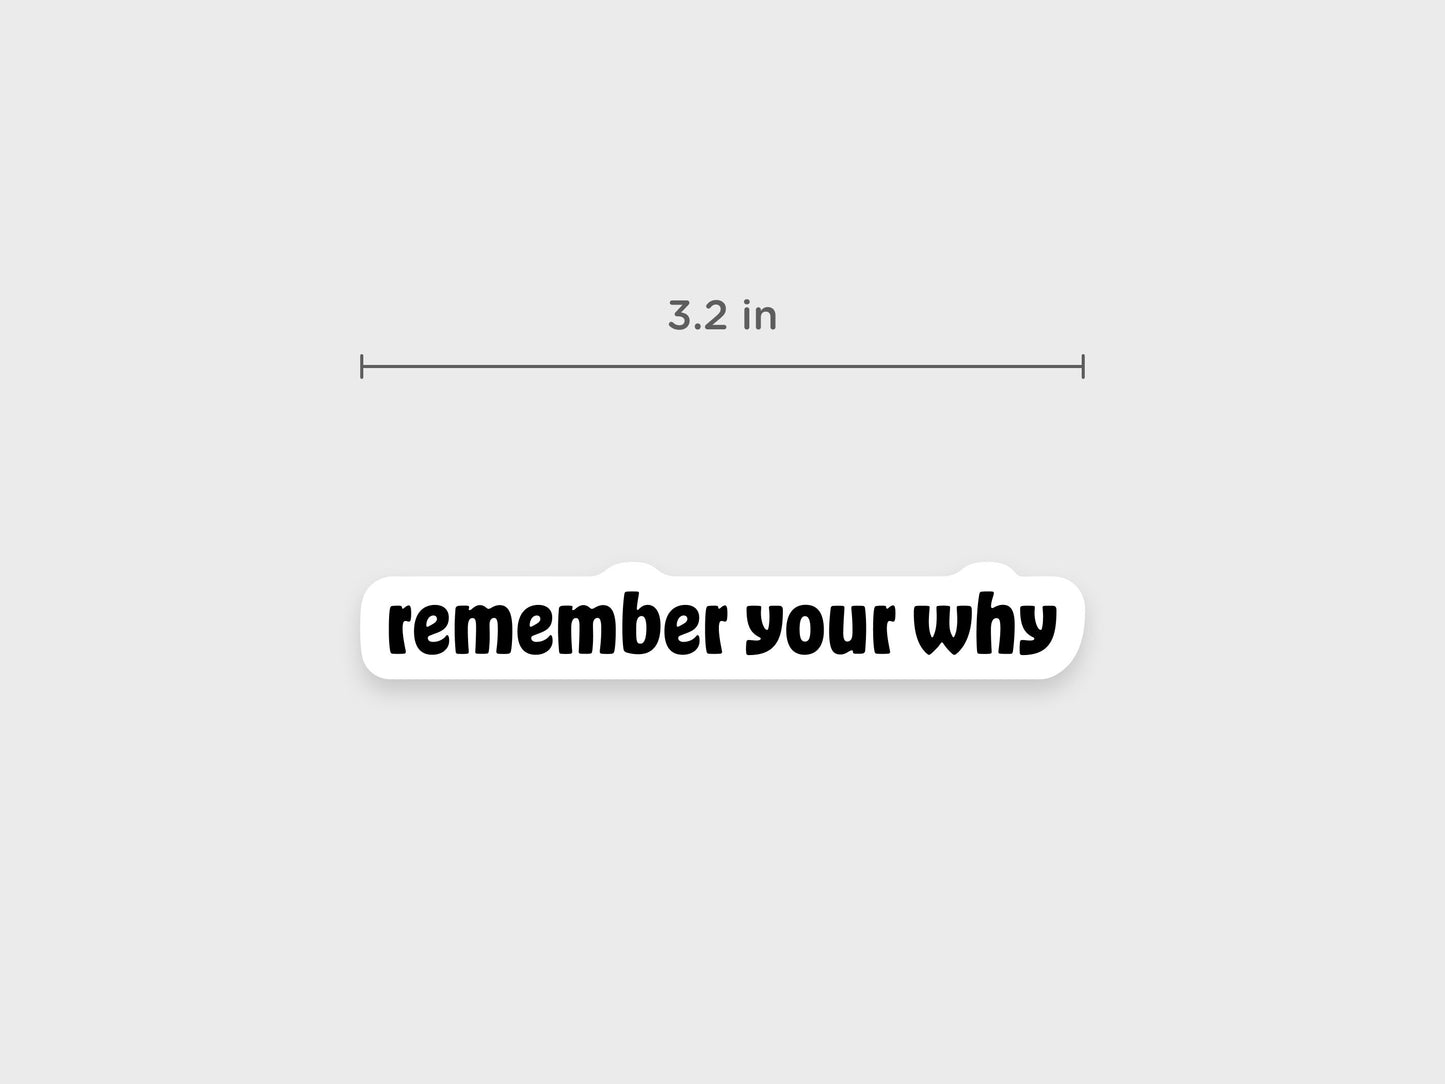 Remember your why